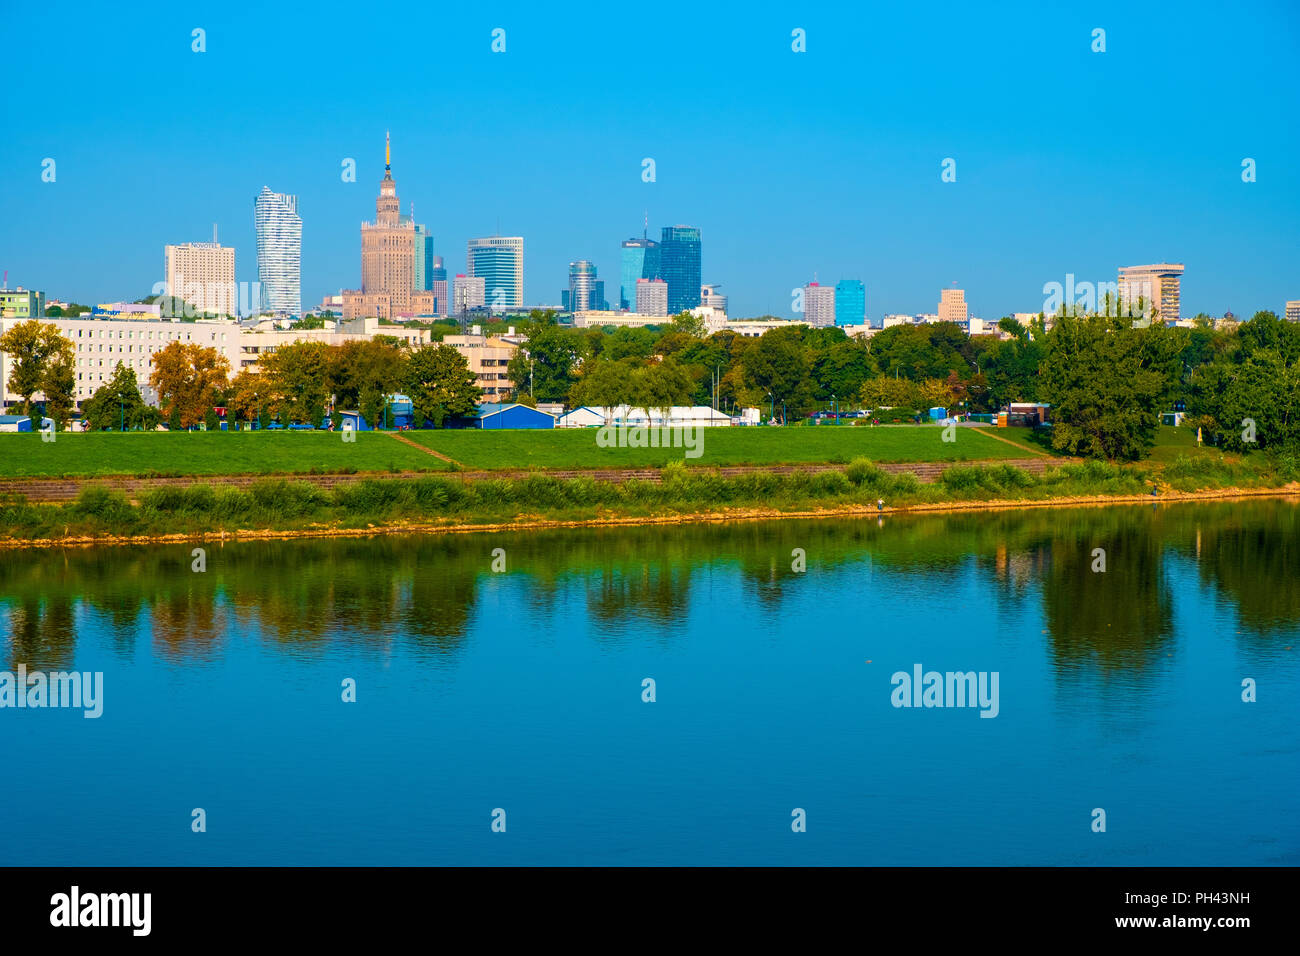 Warsaw, Mazovia / Poland - 2018/08/30: Panoramic view of the Warsaw city center skyscrapers and Solec district across the Vistula river Stock Photo